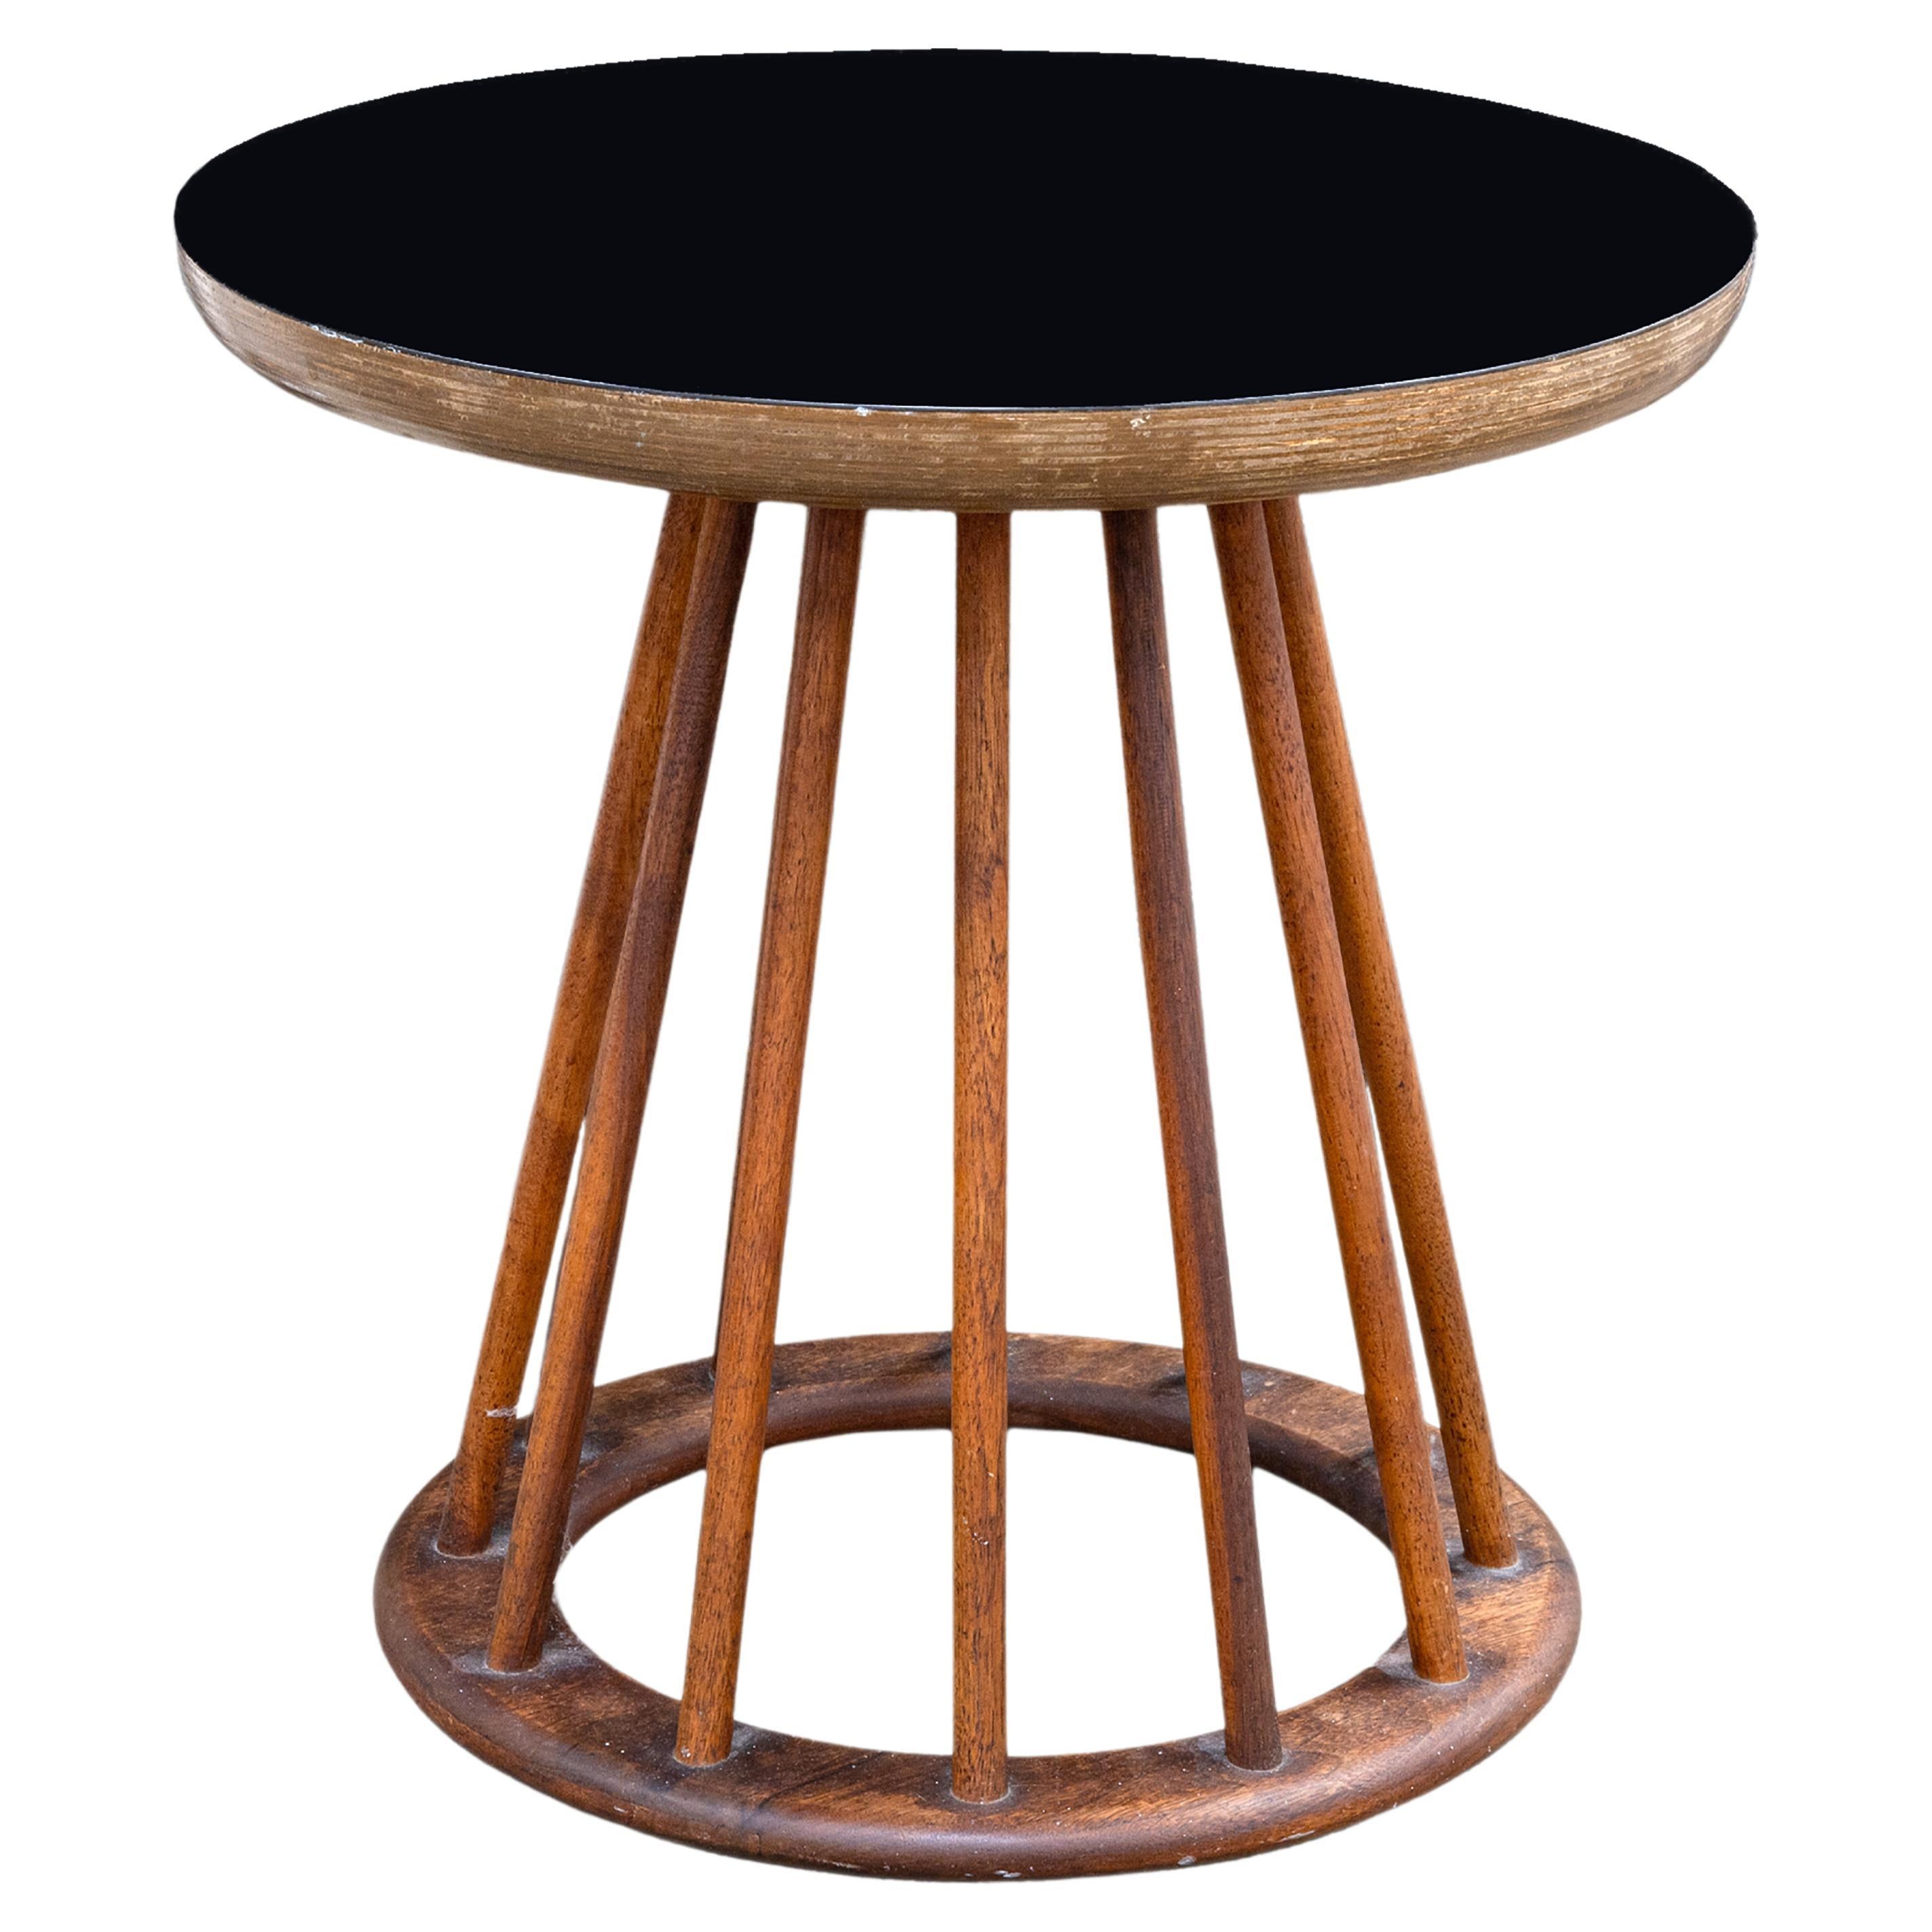 Arthur Umanoff Mid Century Modern Black Top Wooden Spindle Side End Table For Sale